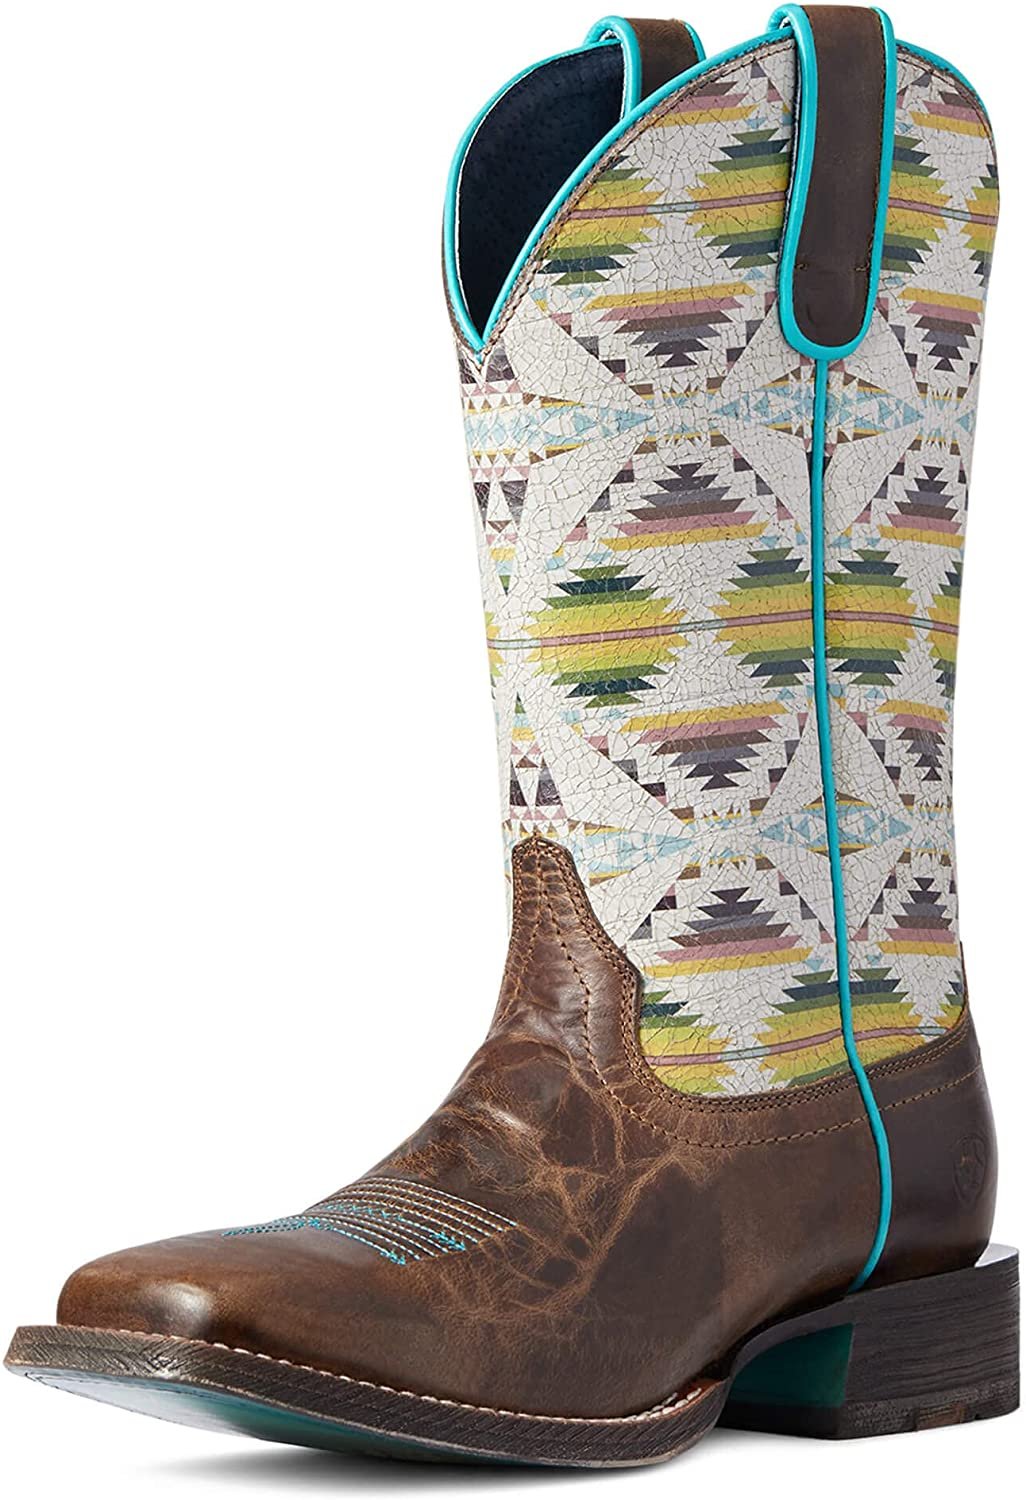 Pre-owned Ariat Women's Pendleton Circuit Savanna Western Boot, Amber Brown/falcon Cove In 8 B